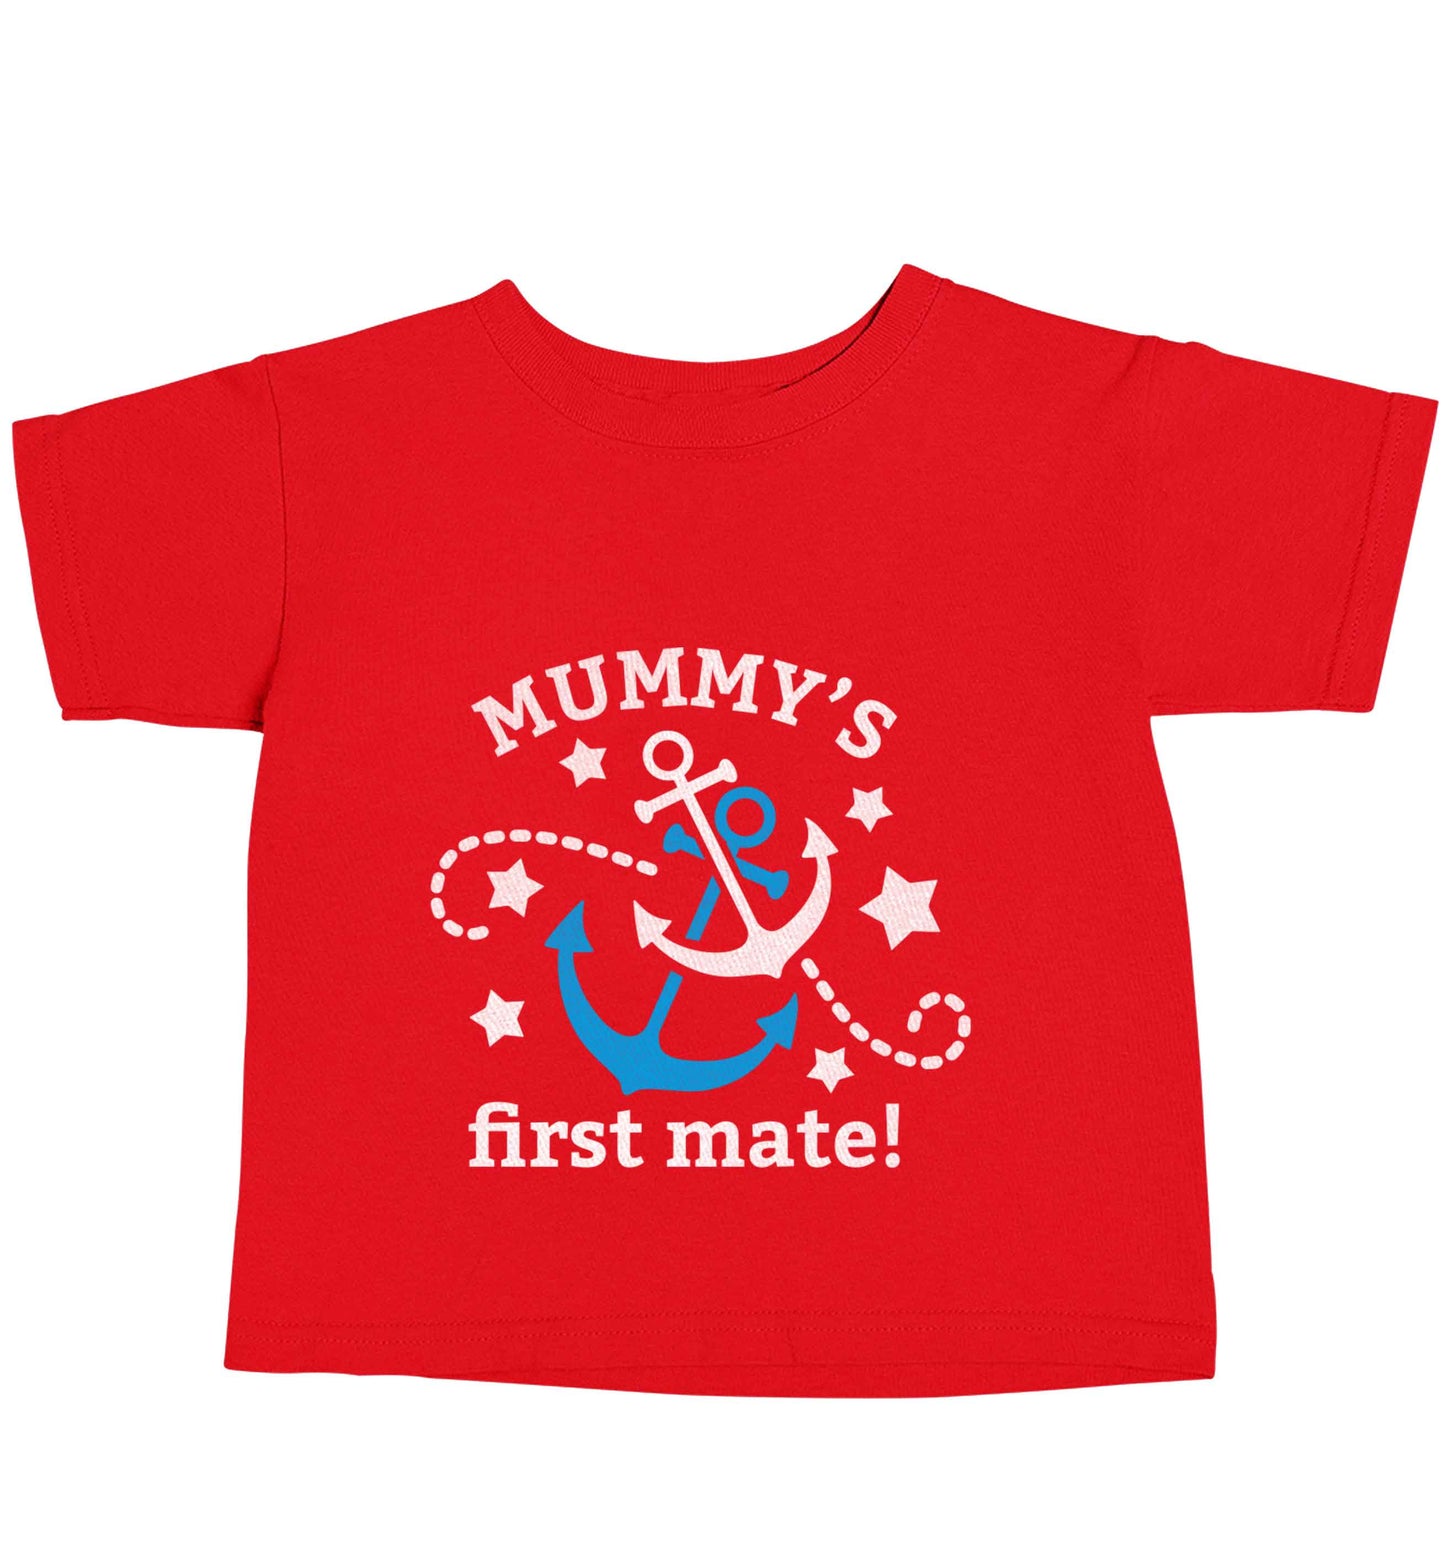 Mummy's First Mate red baby toddler Tshirt 2 Years